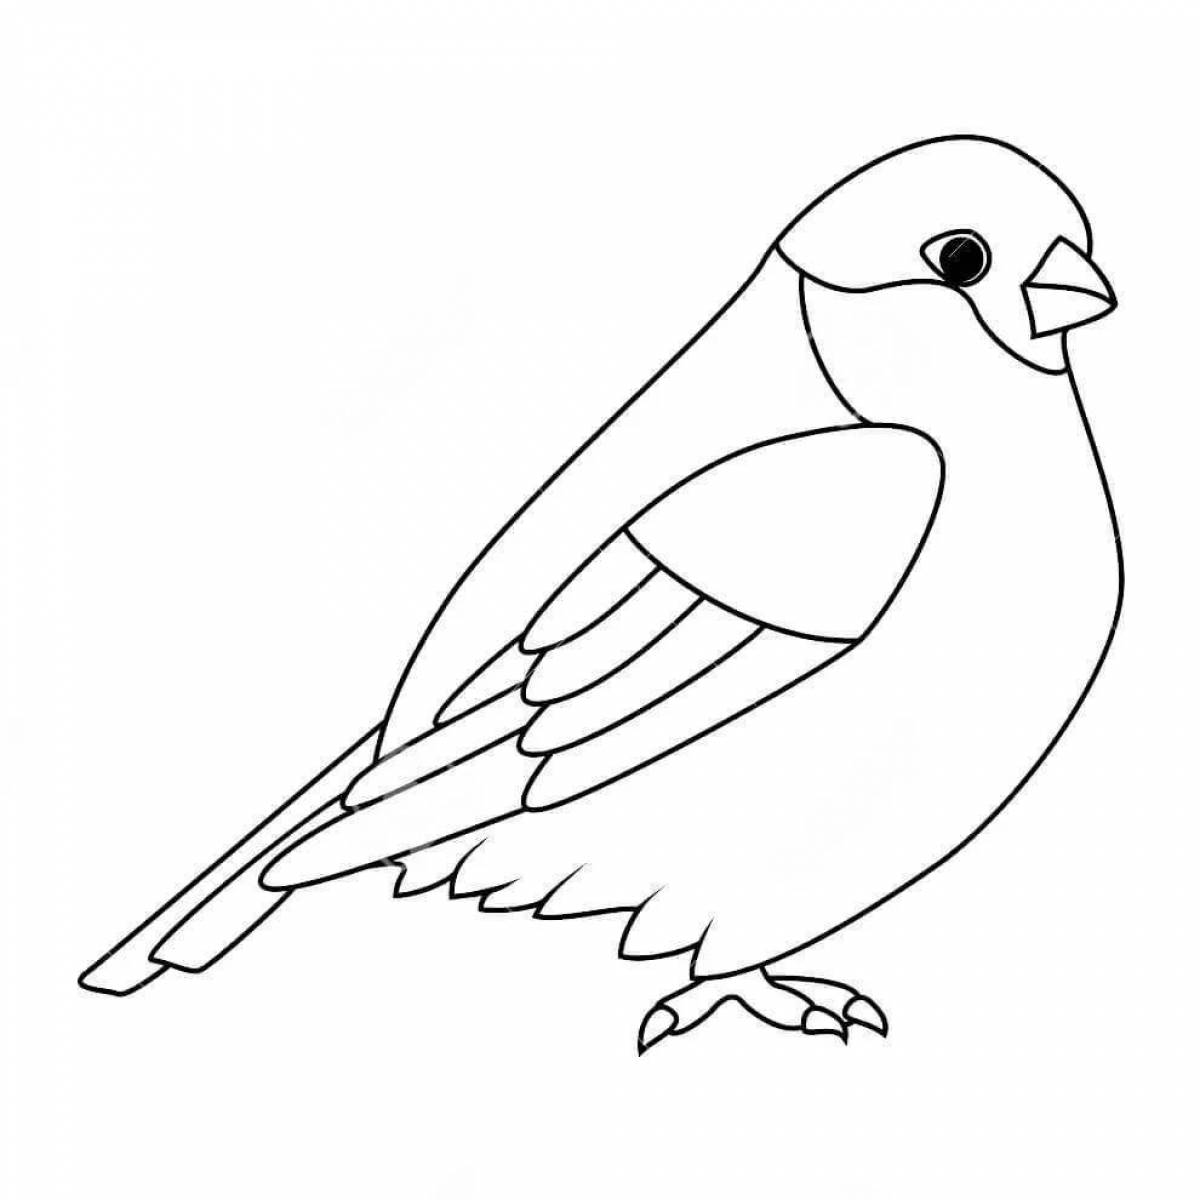 Bright coloring bullfinch for children 4-5 years old